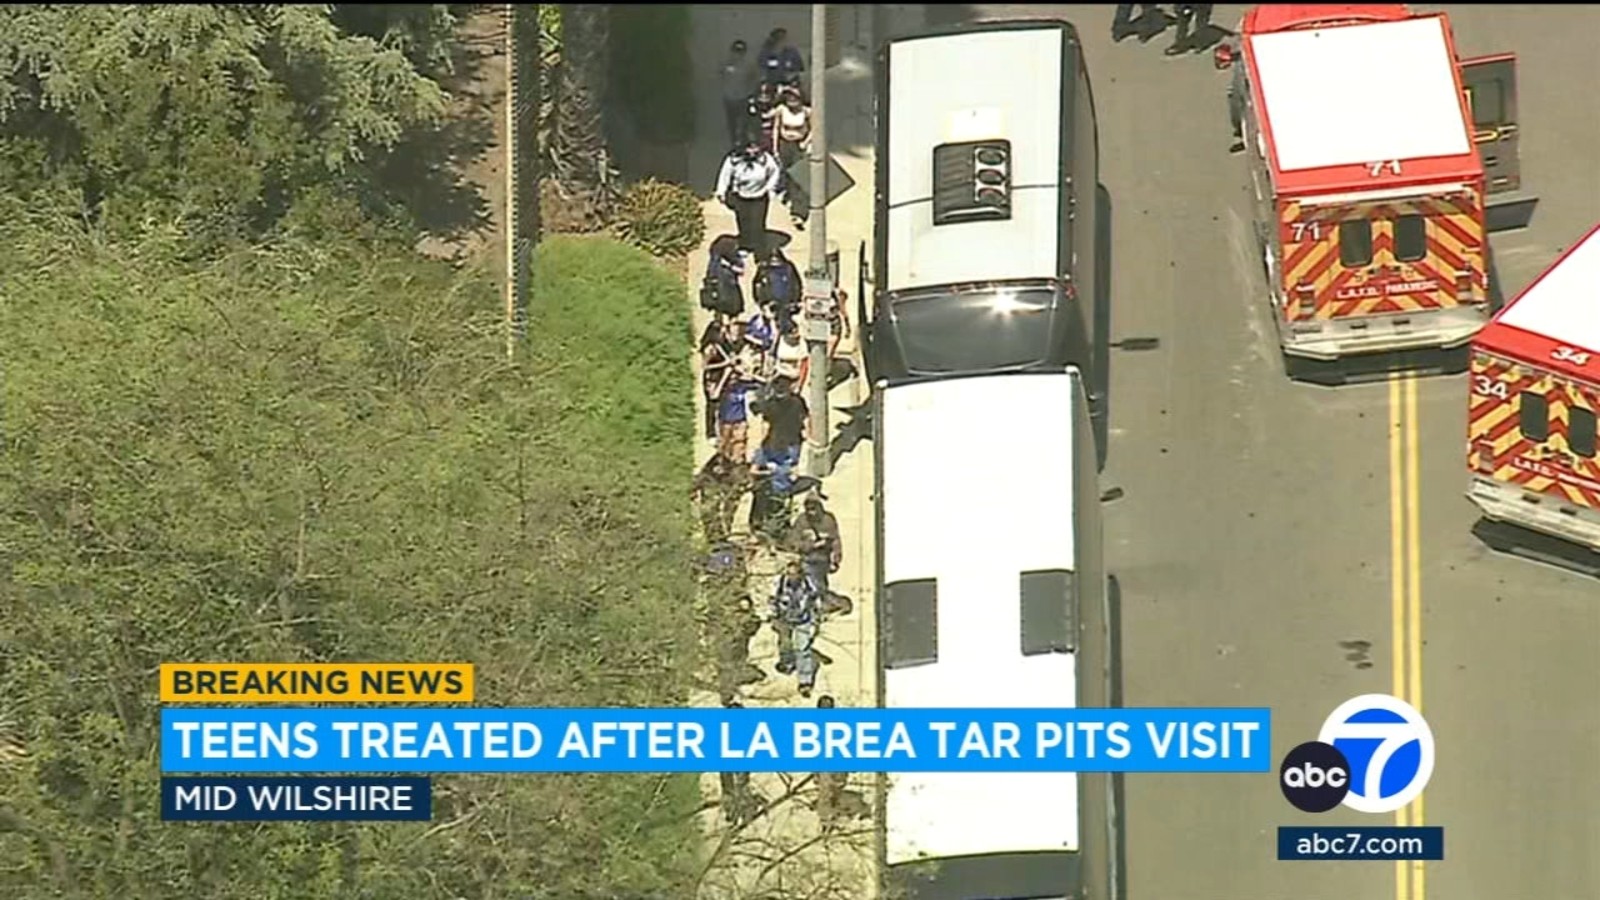 8 students hospitalized after ingesting marijuana edibles during field trip to La Brea Tar Pits